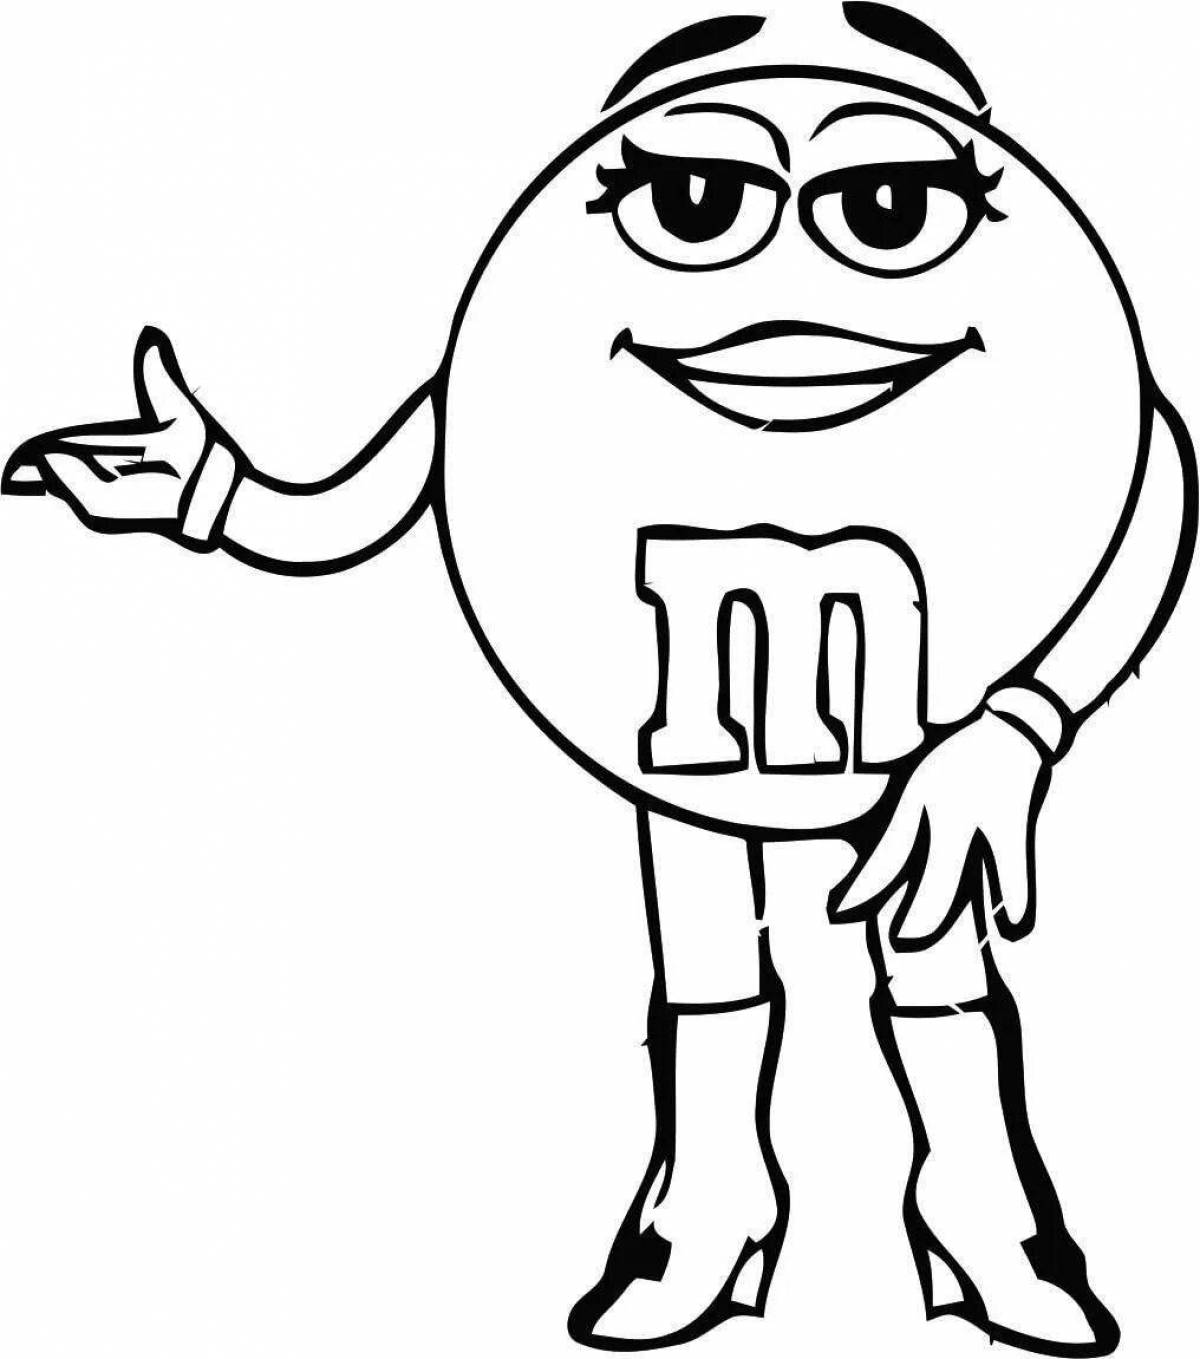 Glowing m&m coloring page